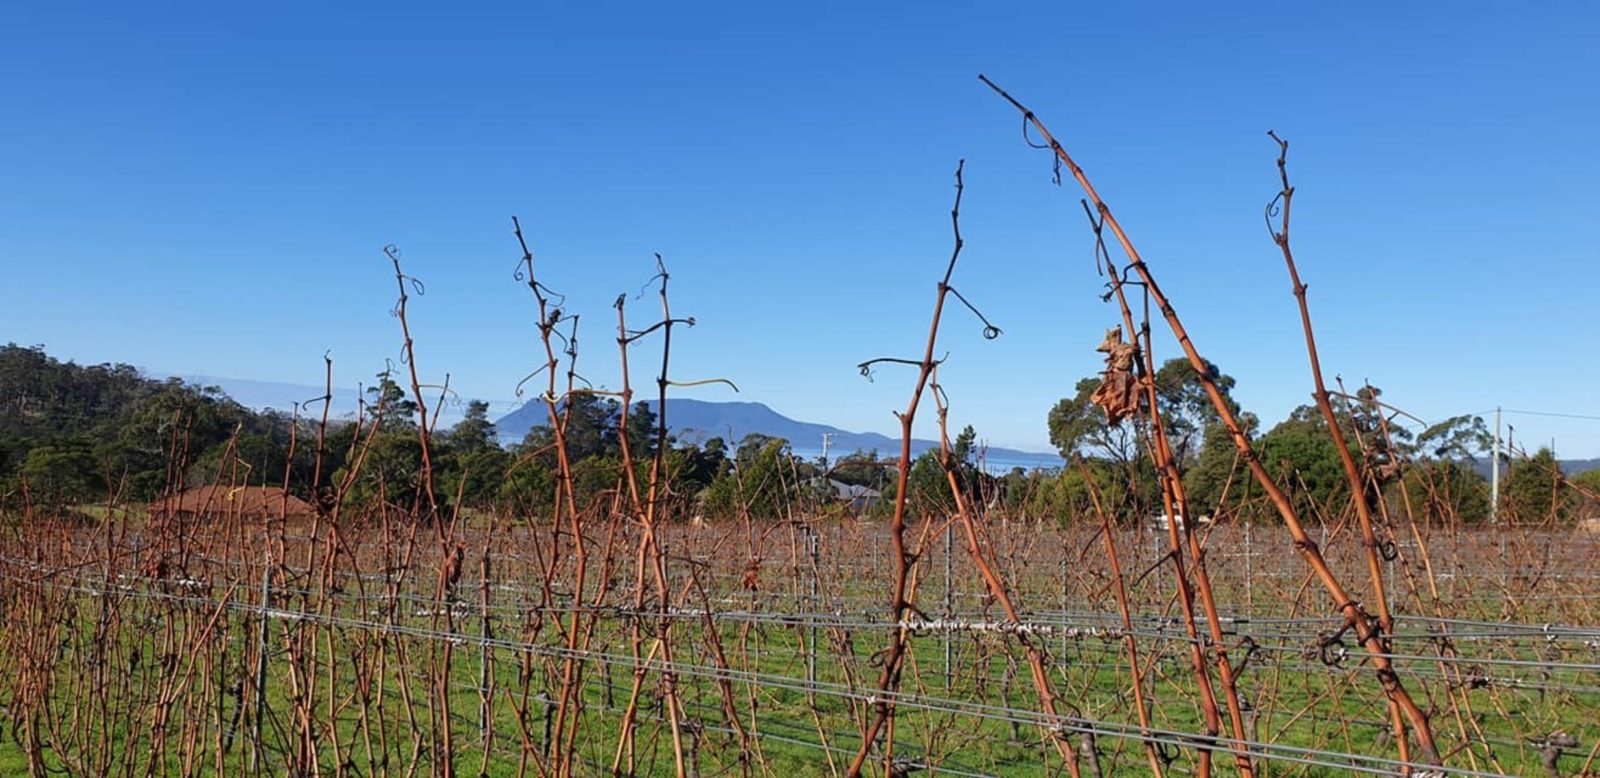 A beautiful day in the Vines